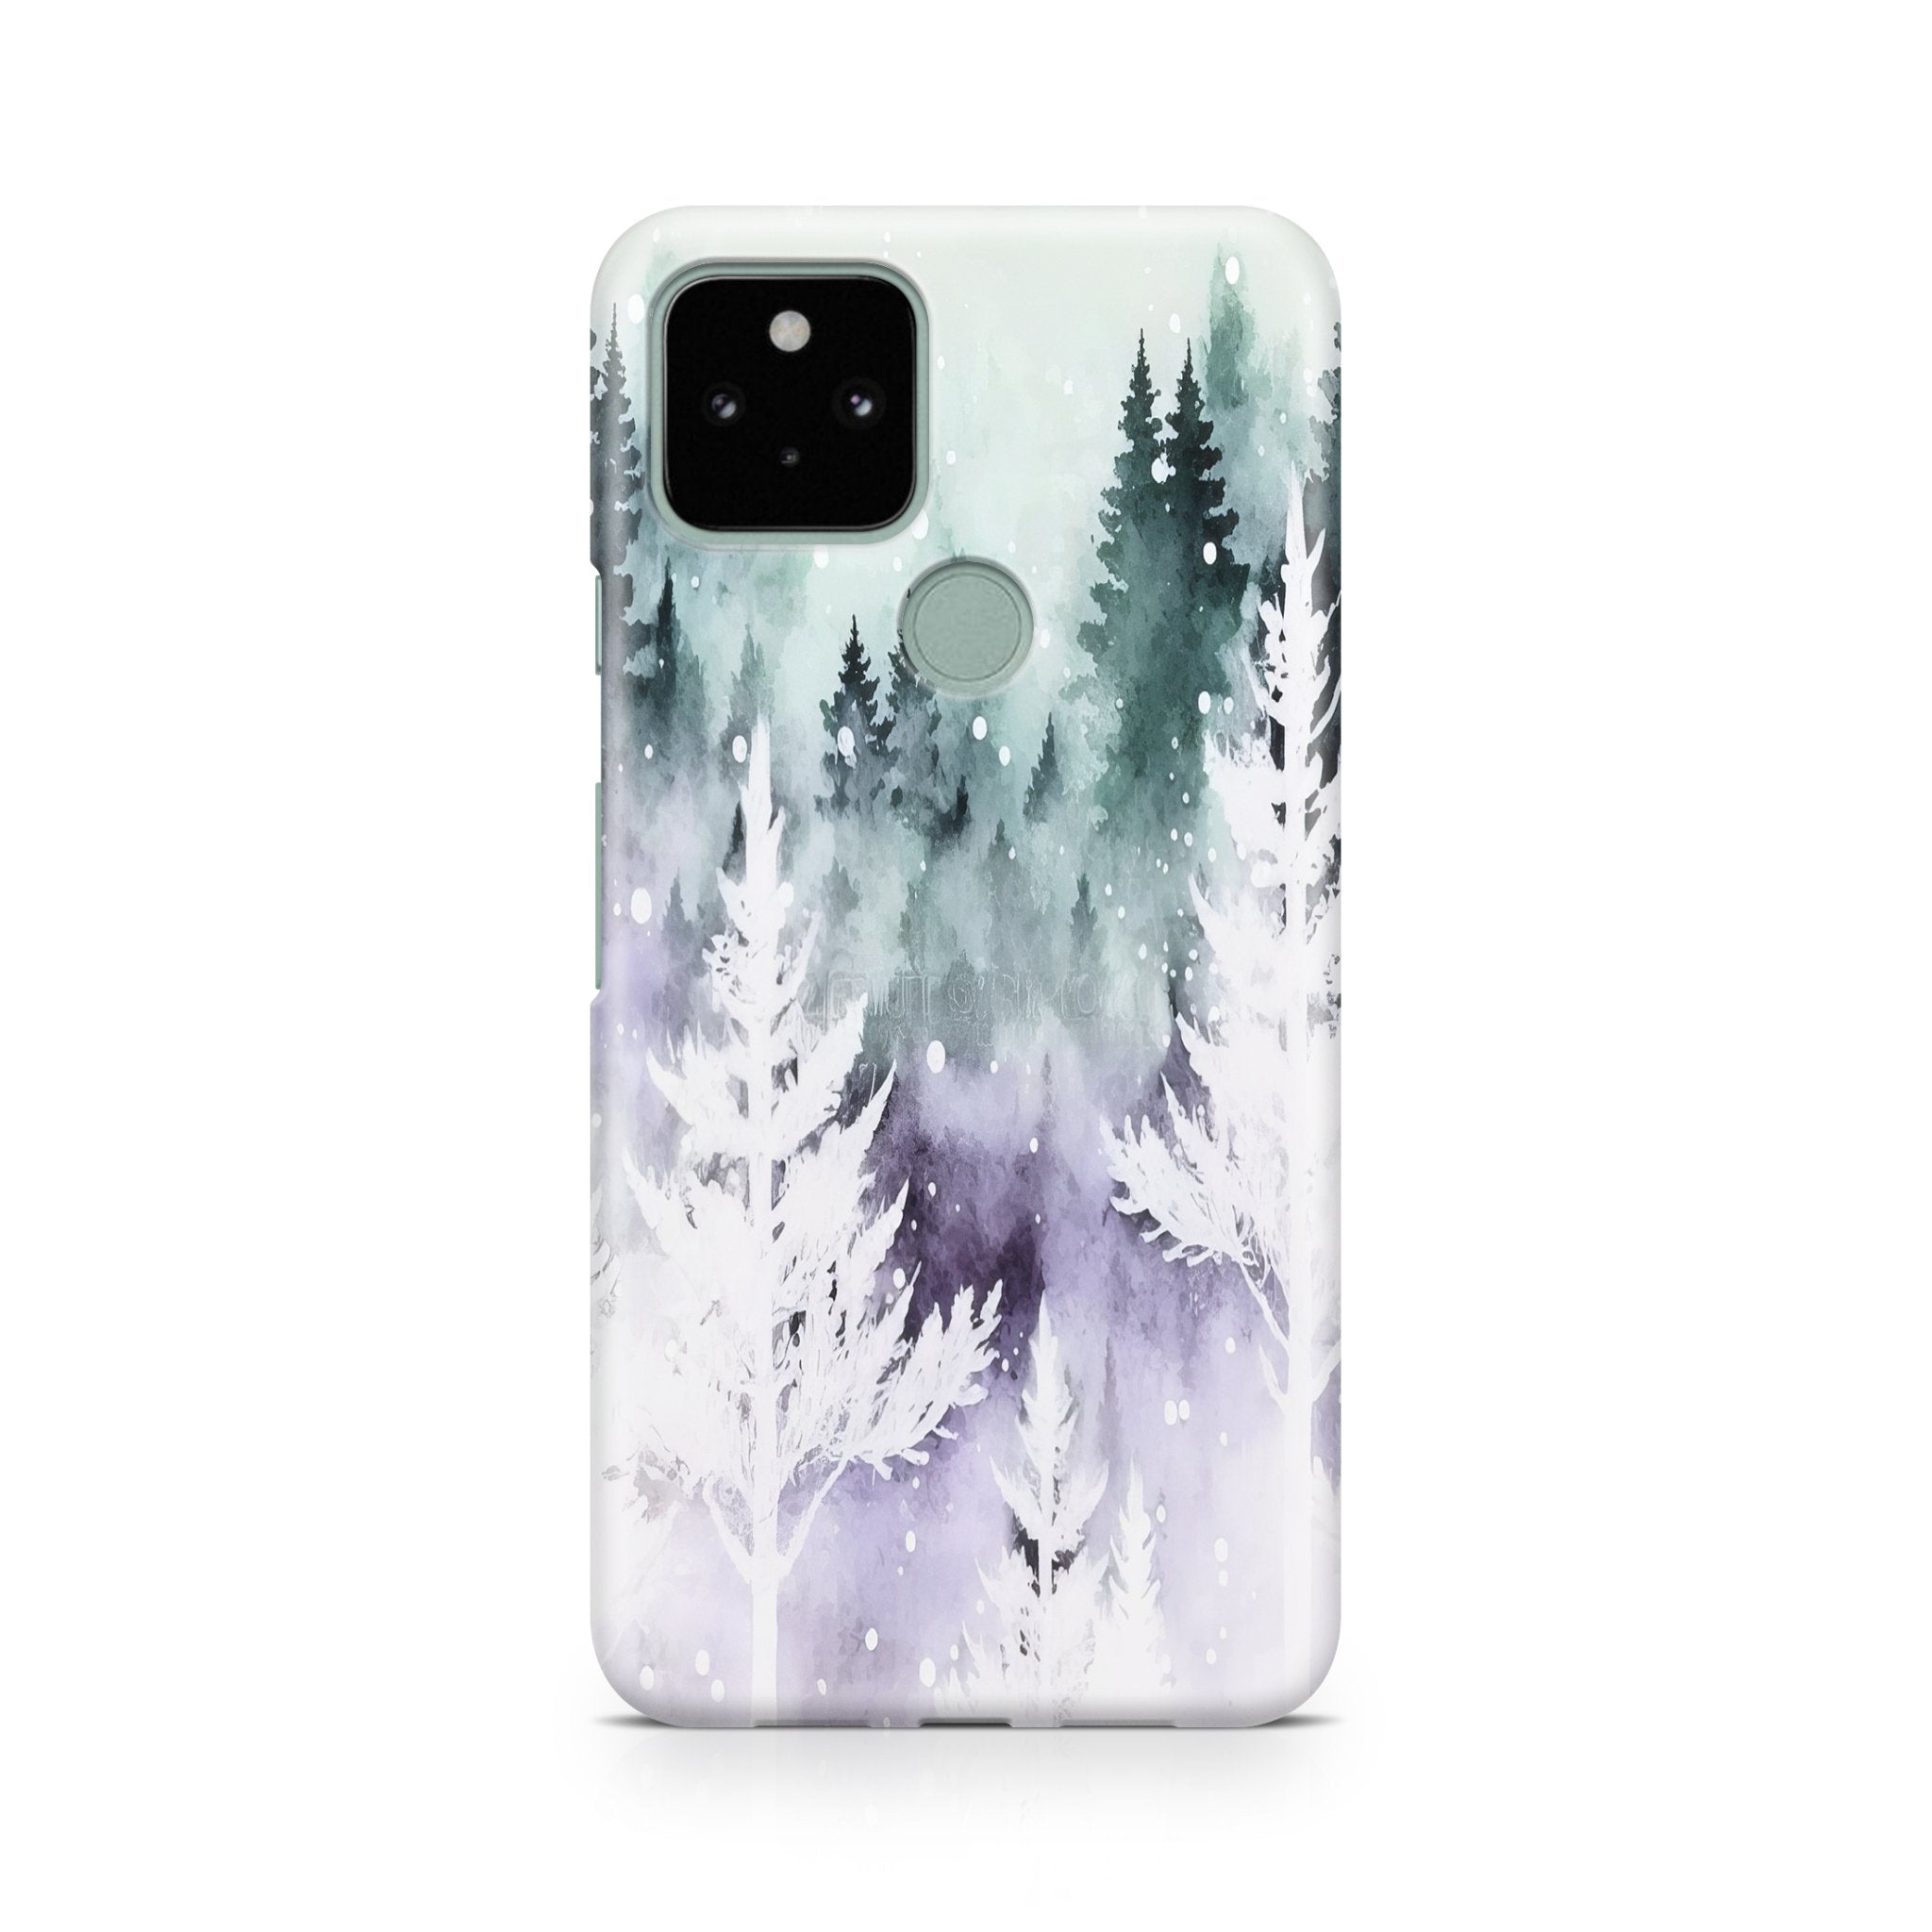 Cloudy Forest - Google phone case designs by CaseSwagger